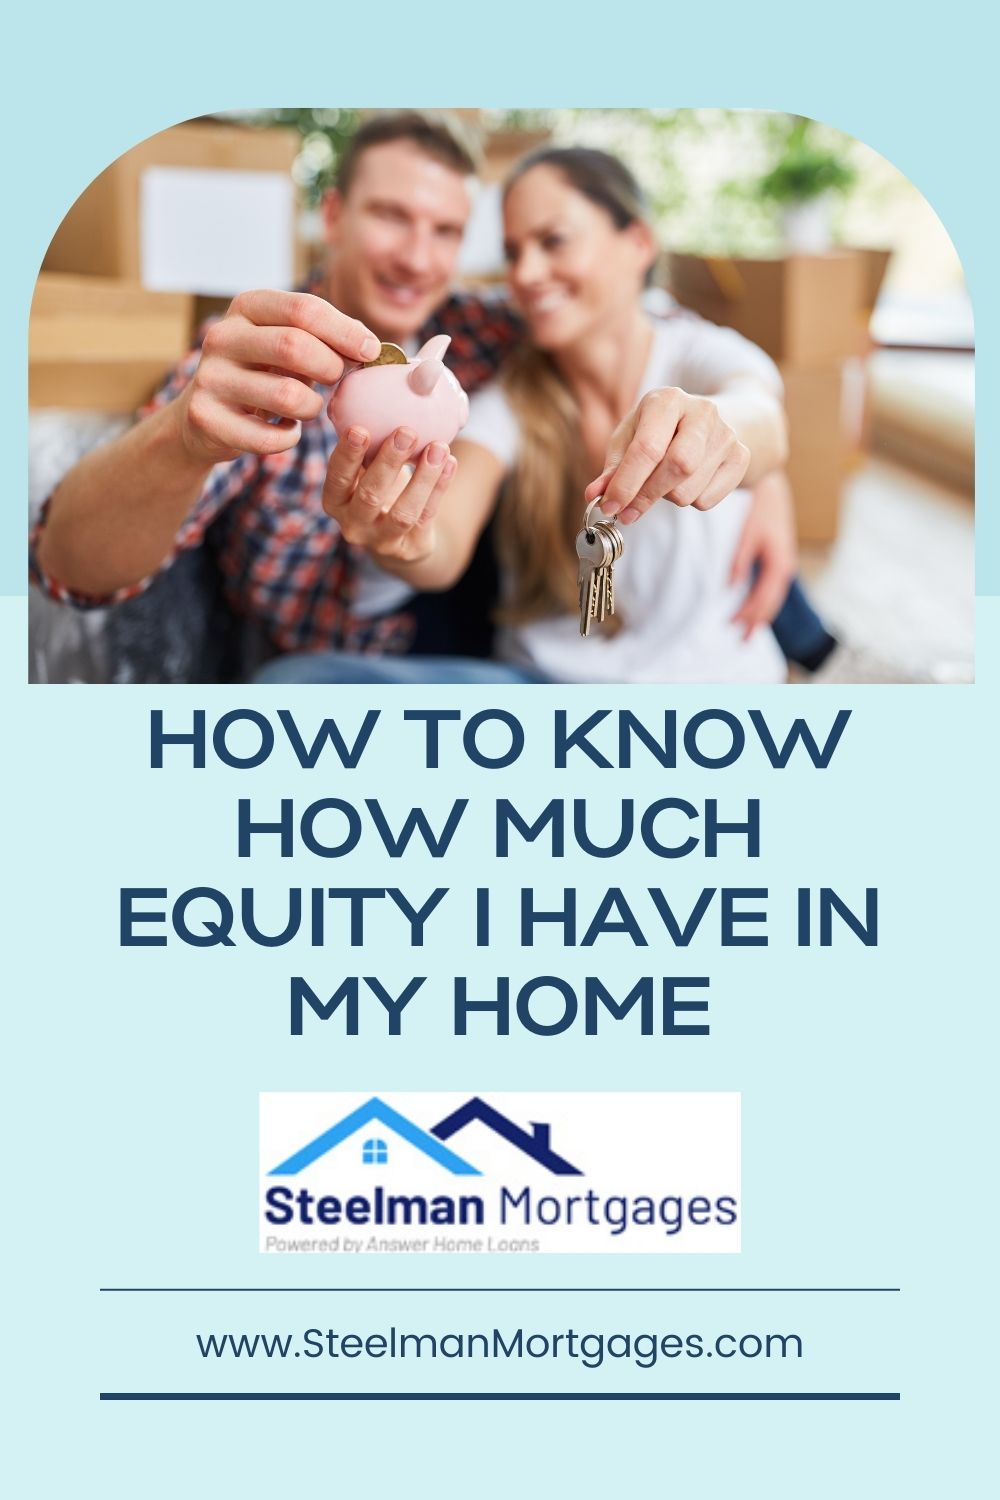 How To Know How Much Equity I Have In My Home